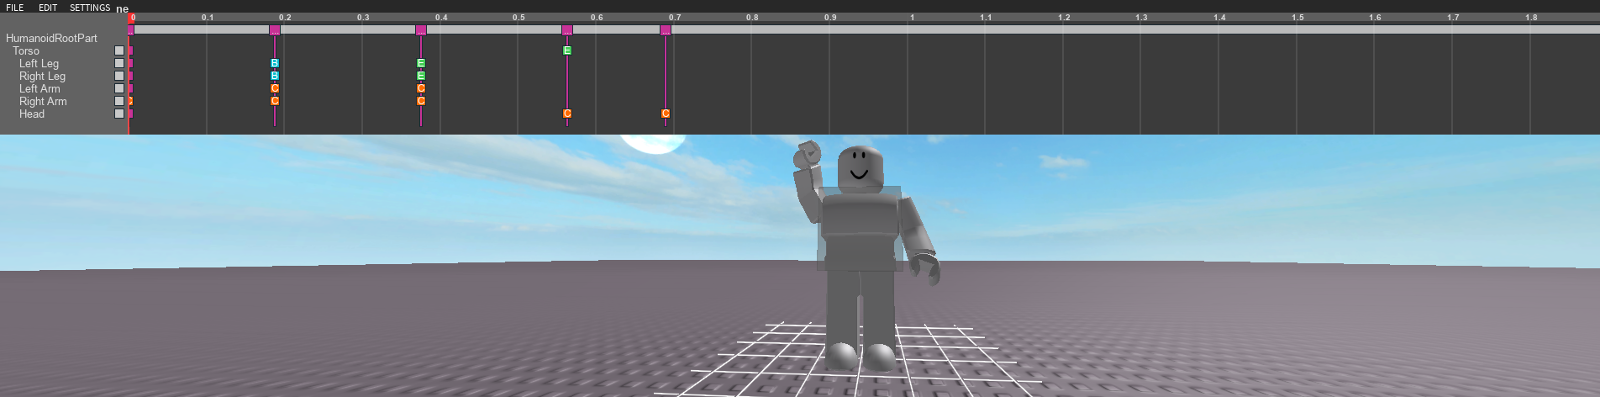 Animations Spring To Life With New Easing Styles Roblox Blog